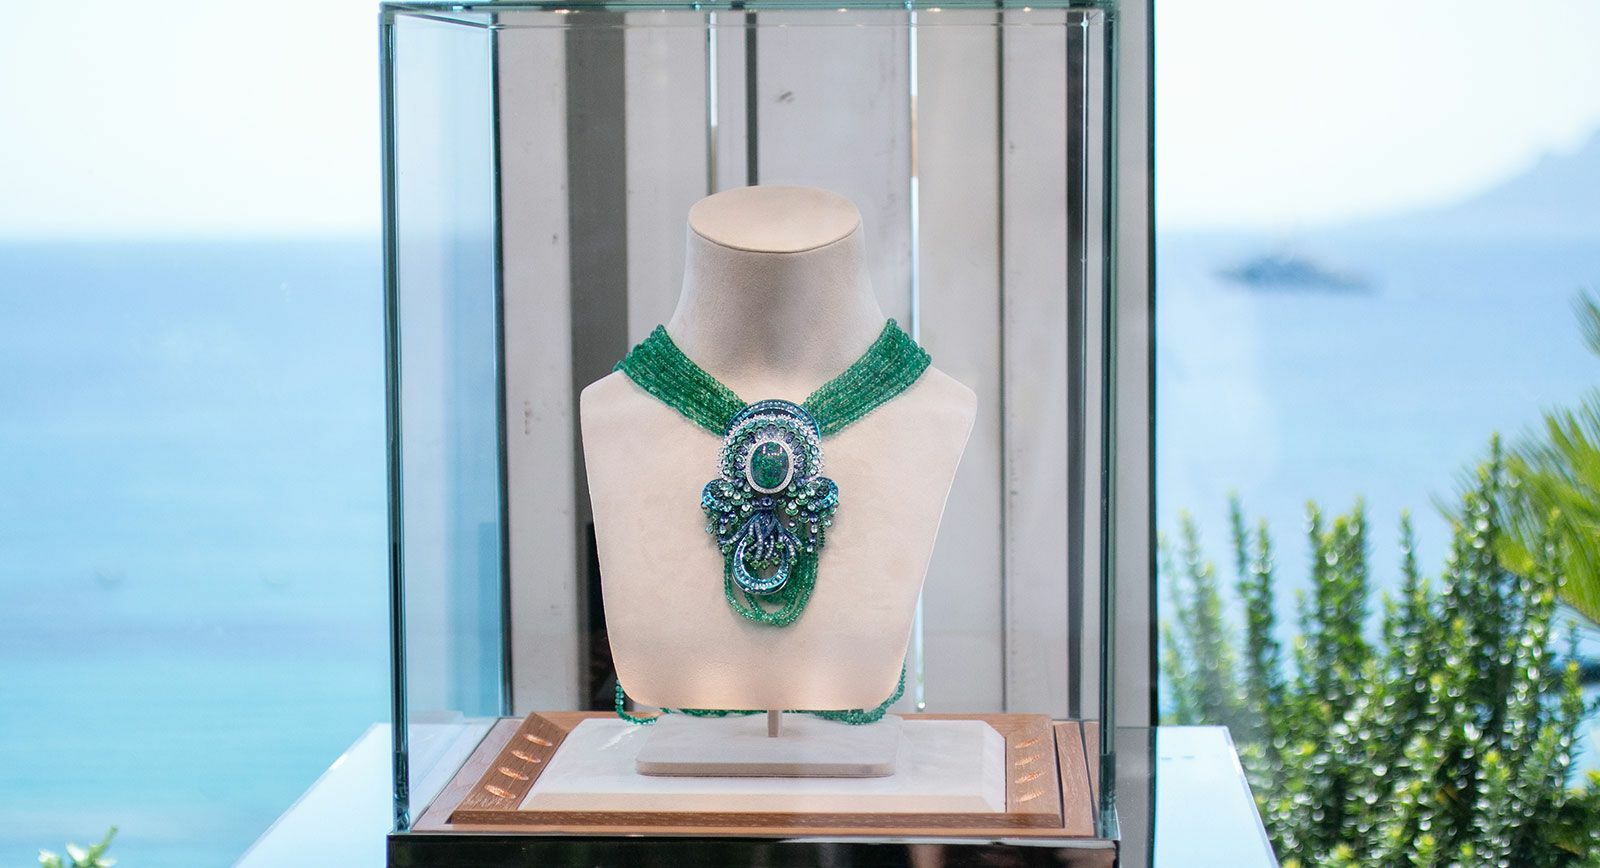 Chopard necklace from The Red Carpet collection with black opals, topaz, tourmalines, coloured sapphires, tsavorites and diamonds set in Fairmined-certified ethical 18k white gold and titanium, with emeralds beads